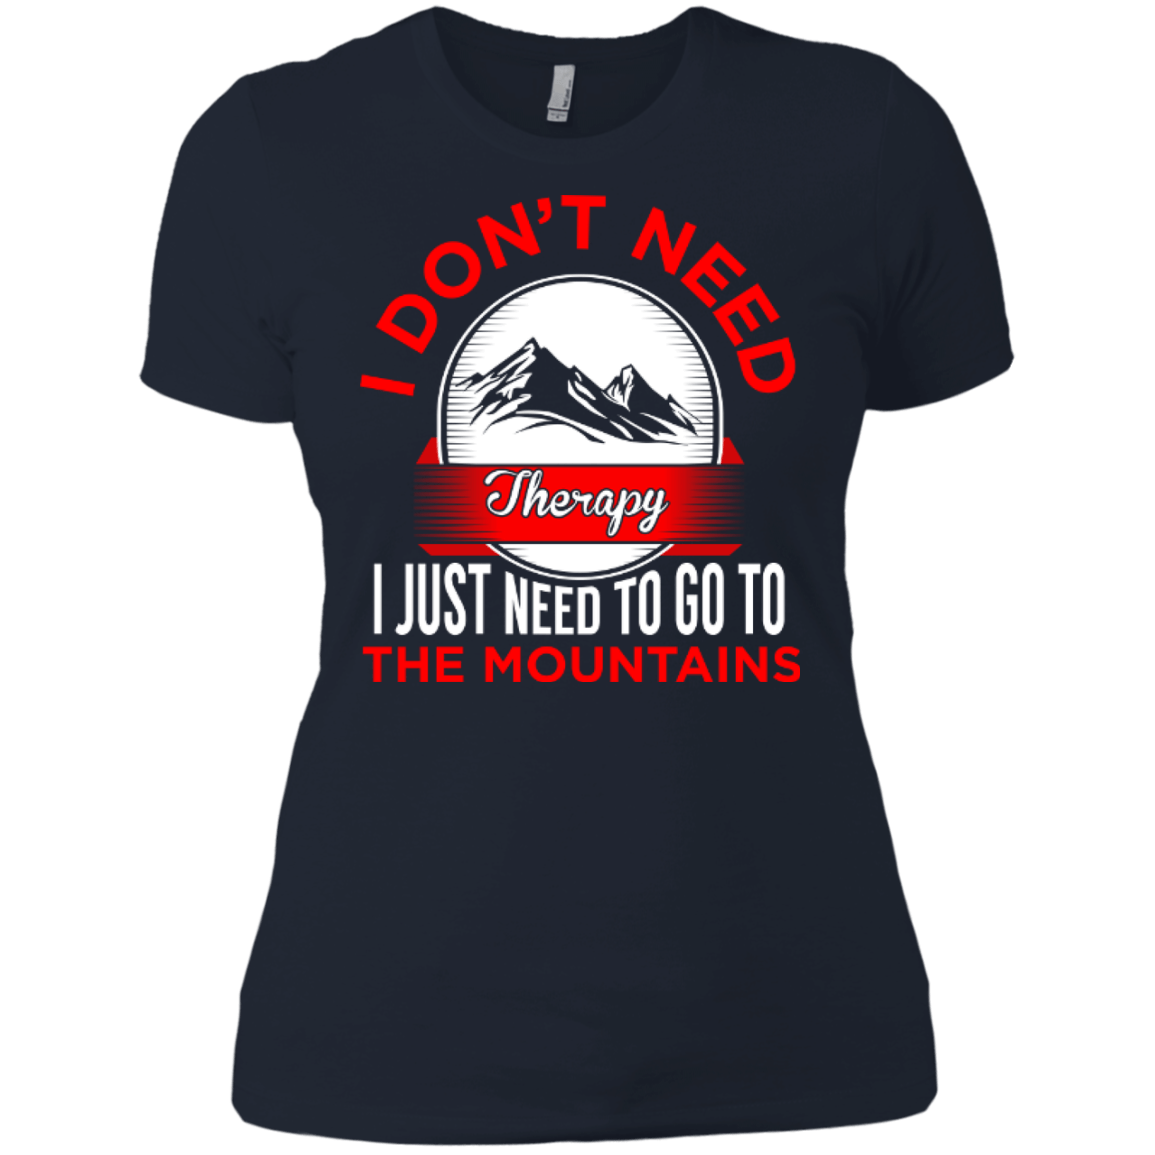 I Don't Need Therapy I Just Need To Go To The Mountains Ladies Tees - Powderaddicts